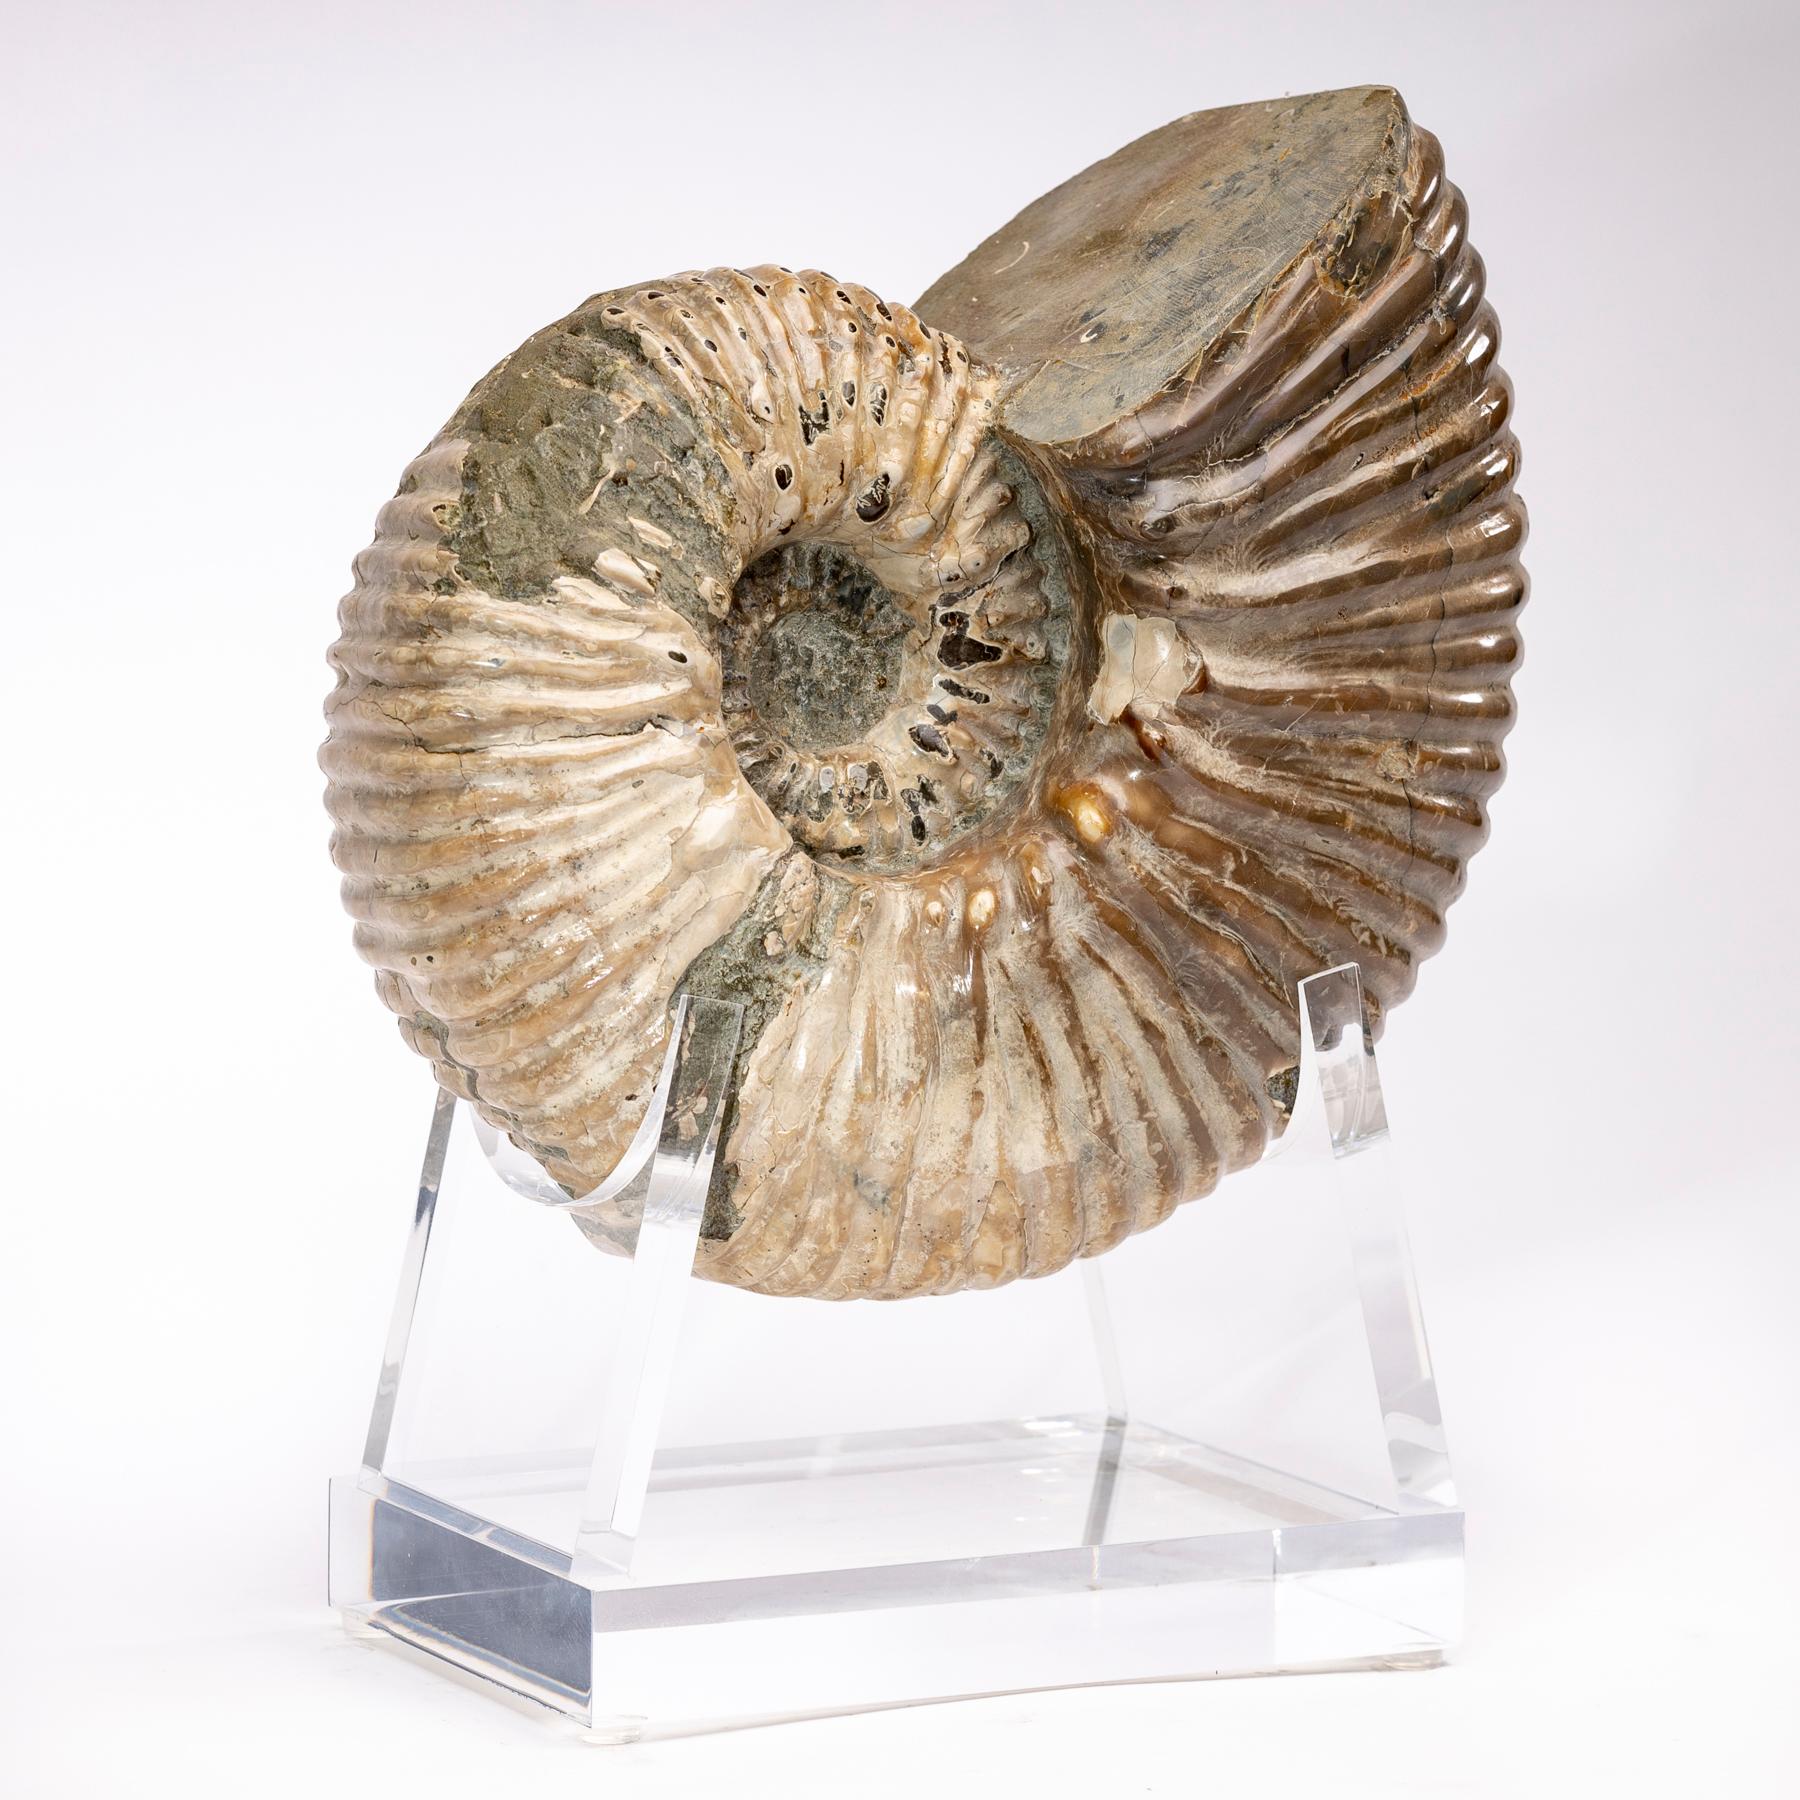 Perisphinctes Ammonite
Period: Jurassic 163-145 Million years ago.
These ammonites could grow from anywhere between 10 mm to over a meter in diameter, making them among the largest of the ammonites.
Ammonites were squid-like predatory creatures